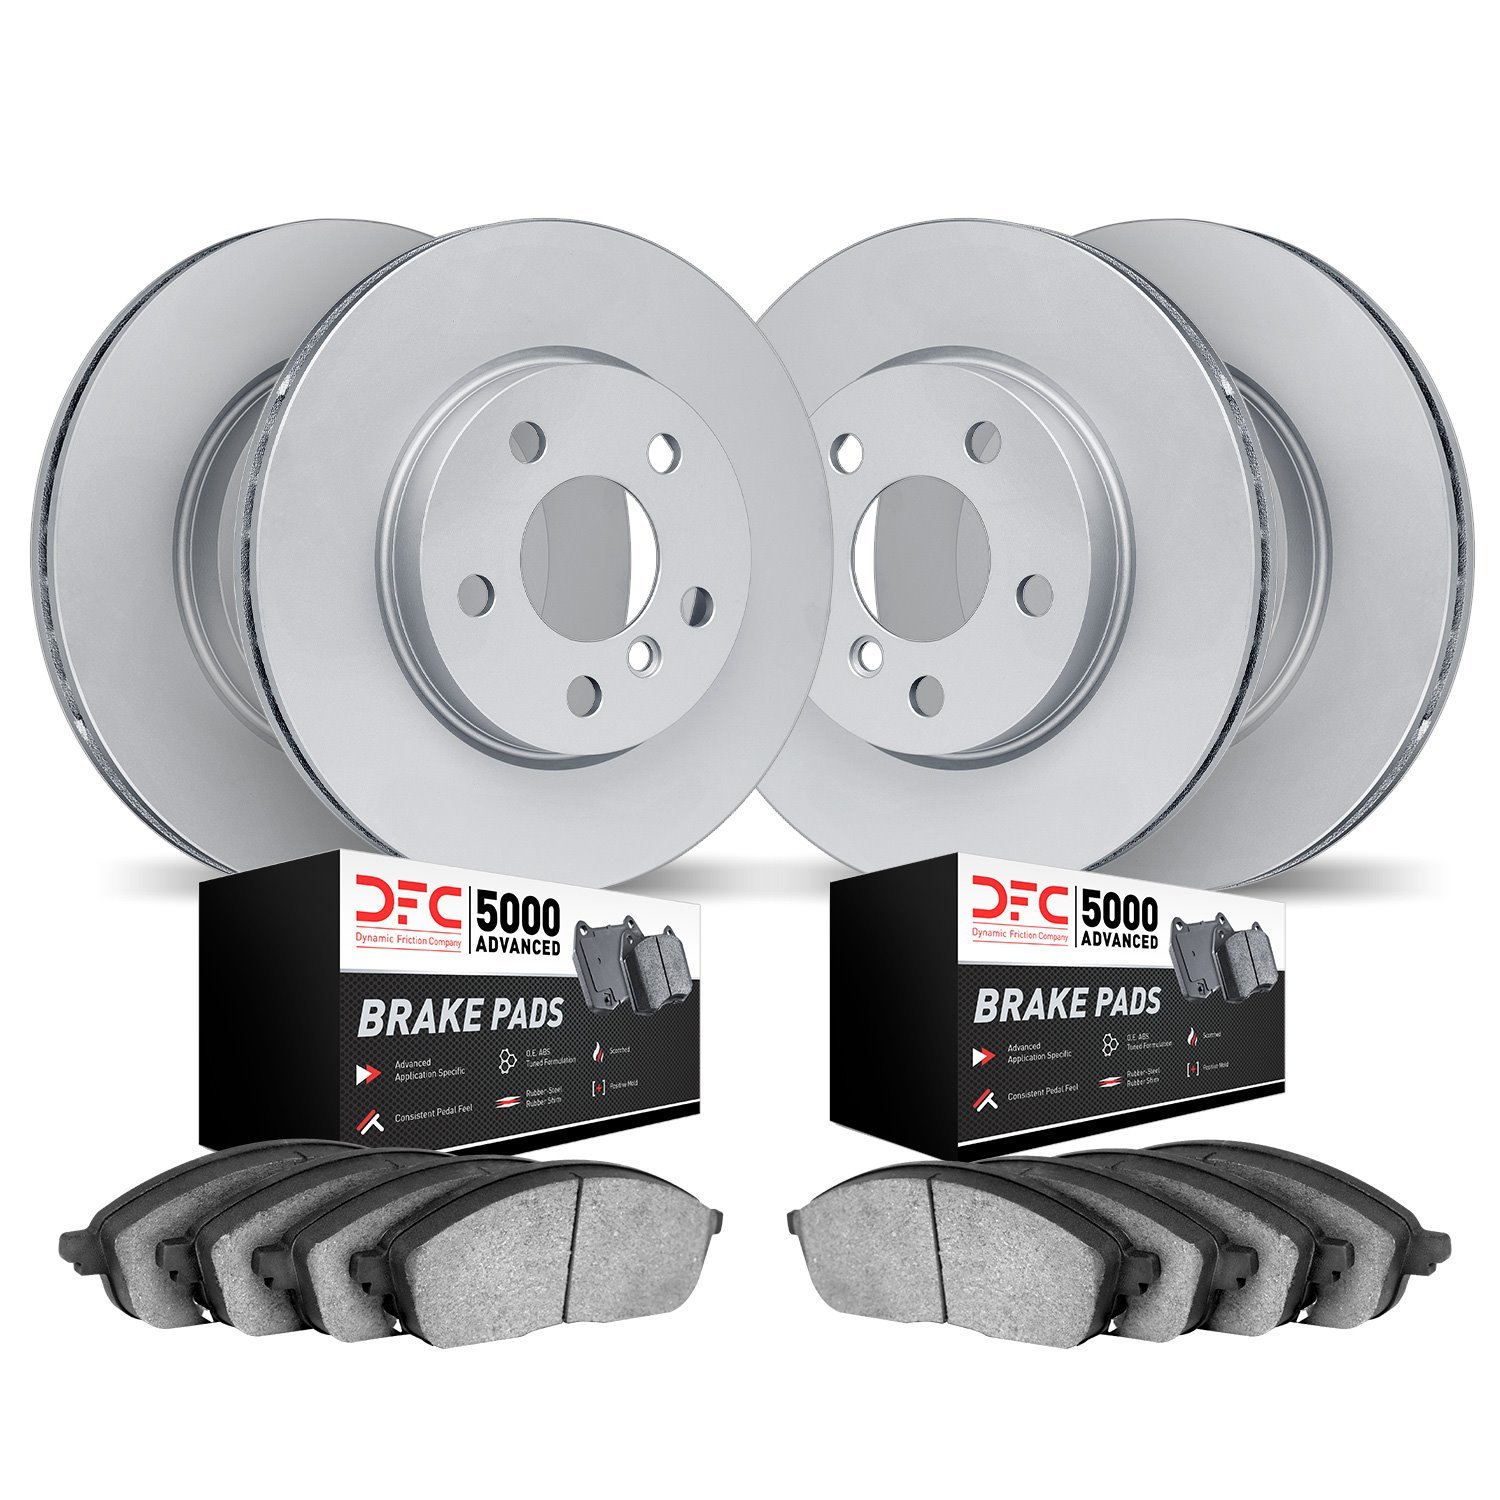 9504-73062 GEOMET Brake Rotors w/5000 Advanced Brake Pads Kit, Fits Select Audi/Volkswagen, Position: Front and Rear